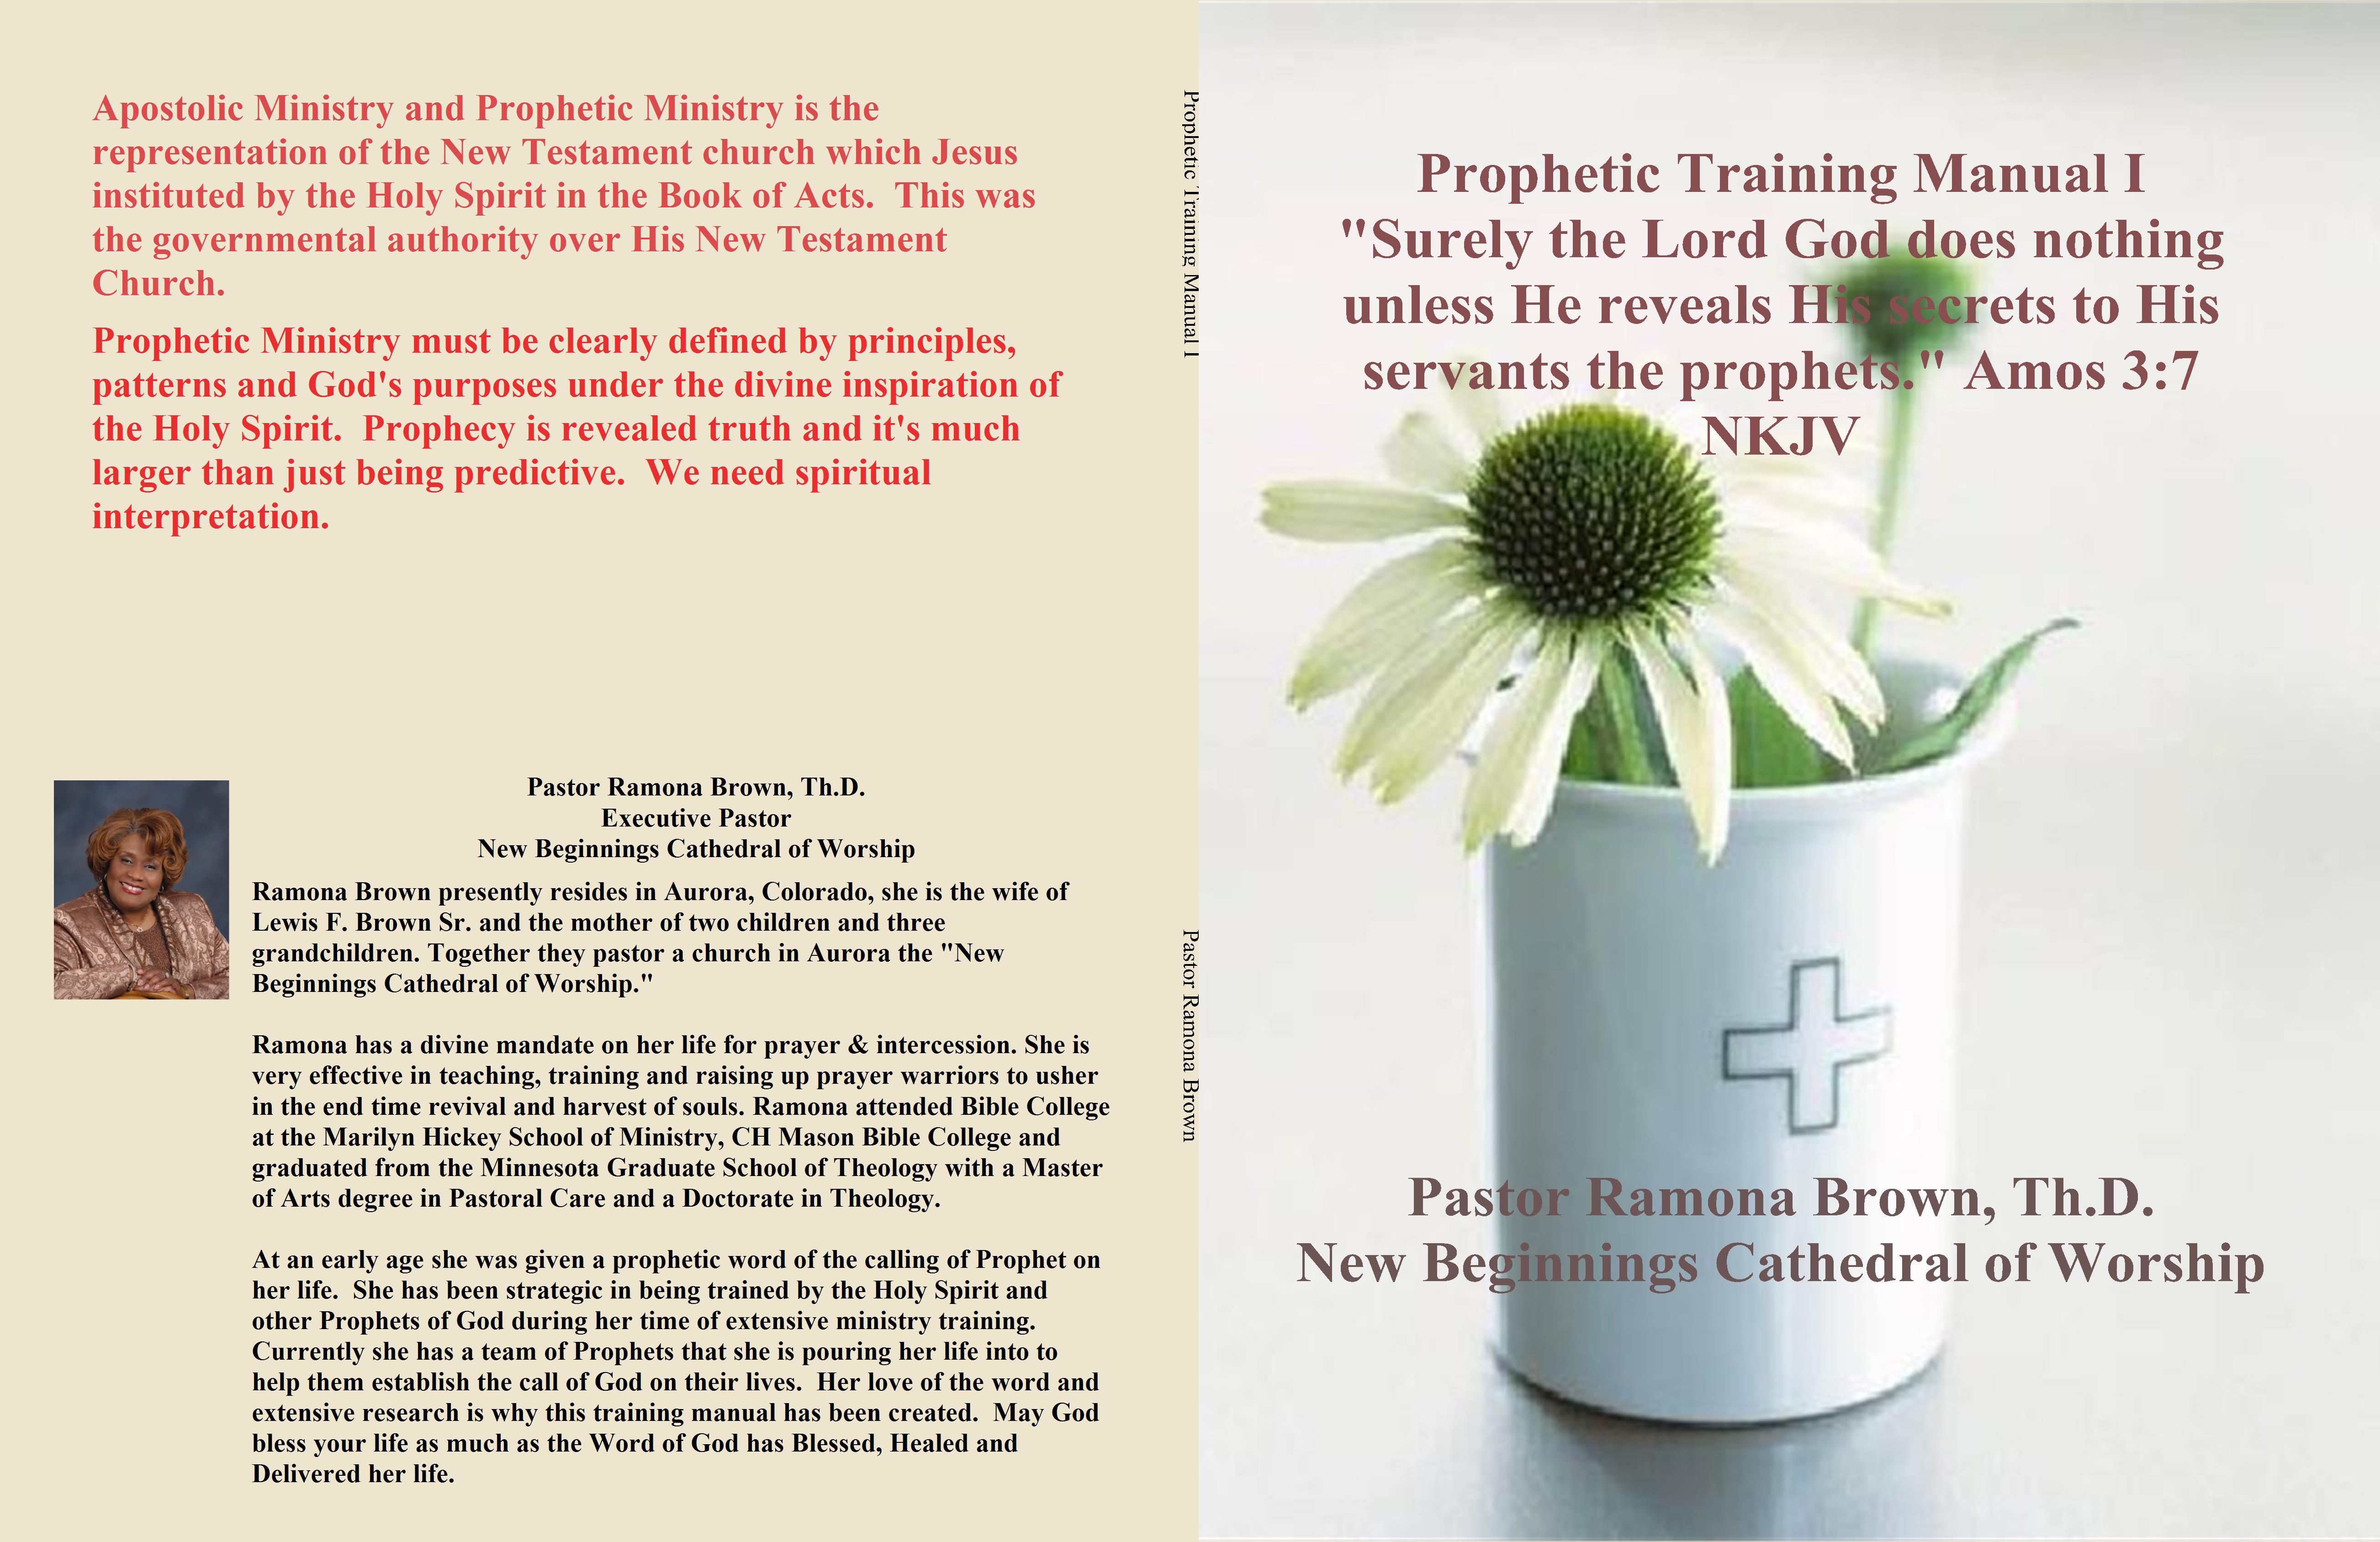 Prophetic Training Manual I "Surely the Lord God does nothing unless He reveals His secrets to His servants the prophets." Amos 3:7 NKJV cover image